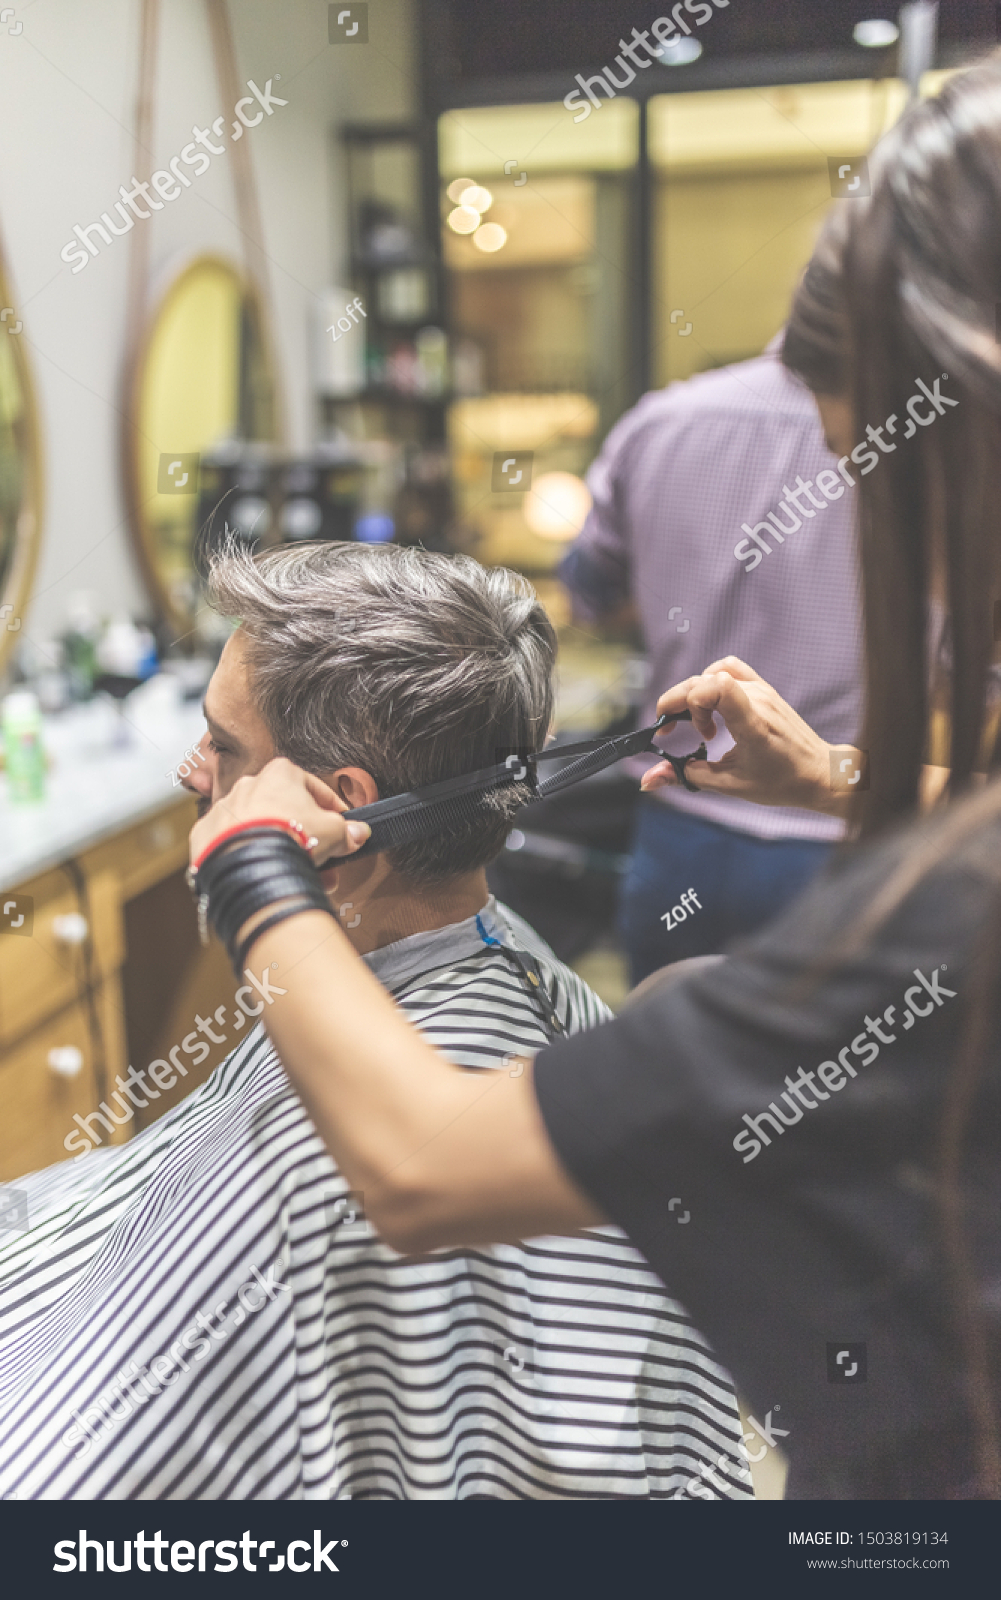 Men hairstyling and haircut in a barber shop or hair salon. #1503819134